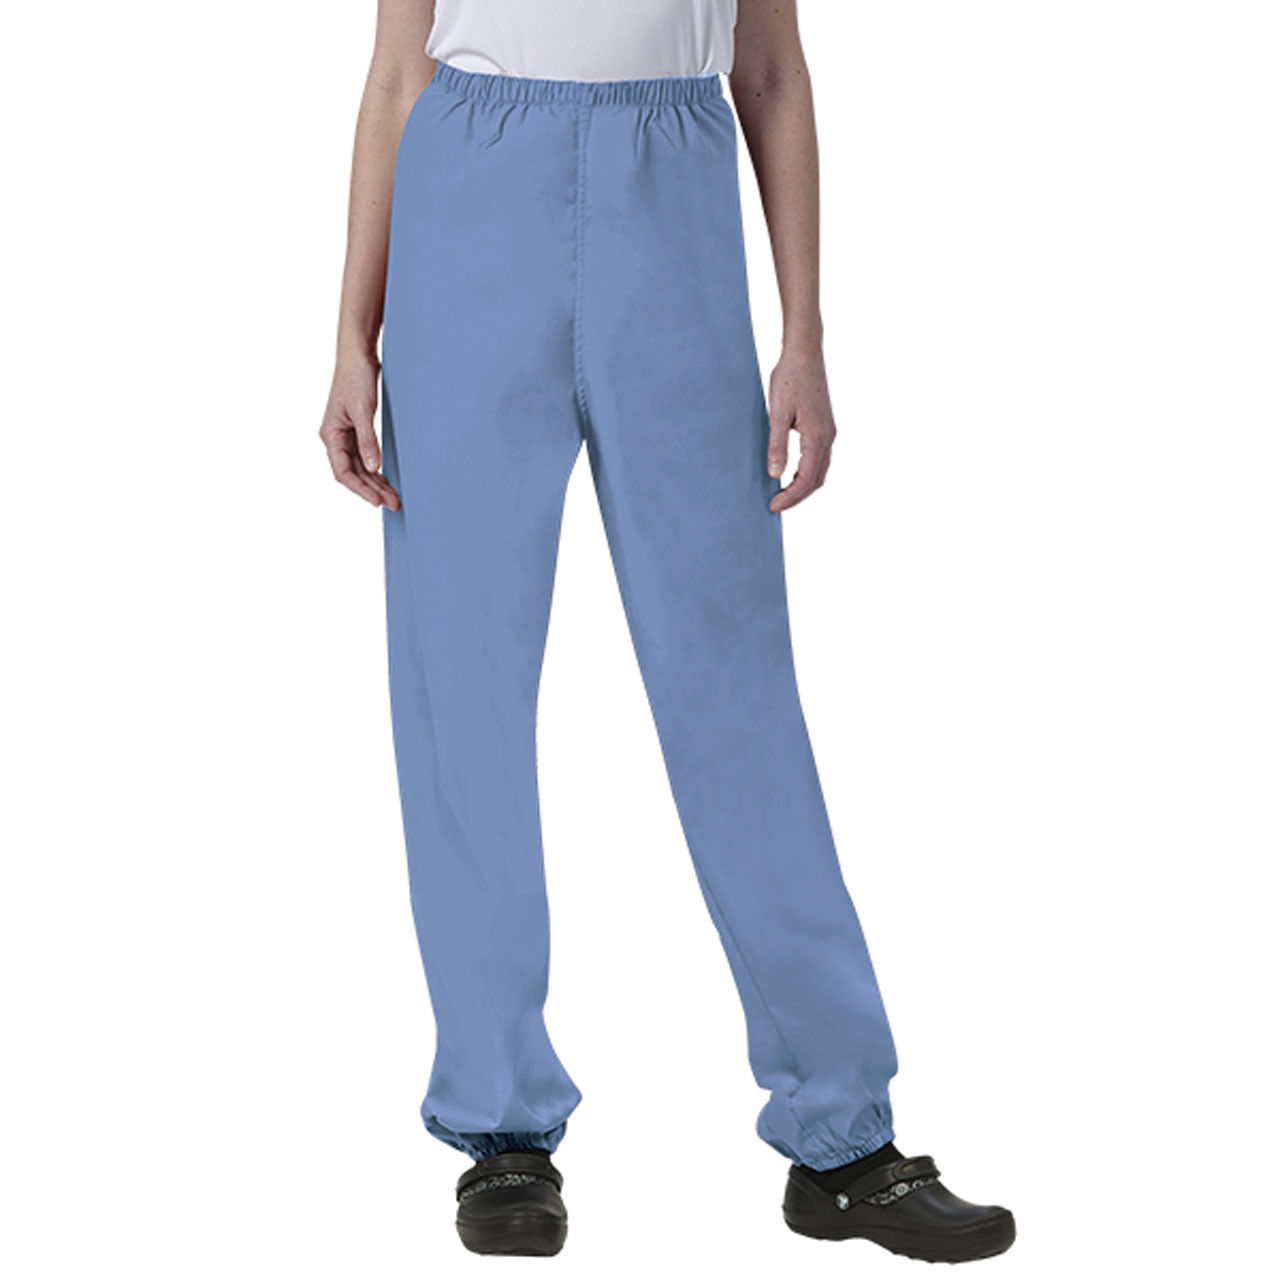 Do polyester elastic waistband wholesalers offer Fashion Seal's healthcare scrub pants in different colors?